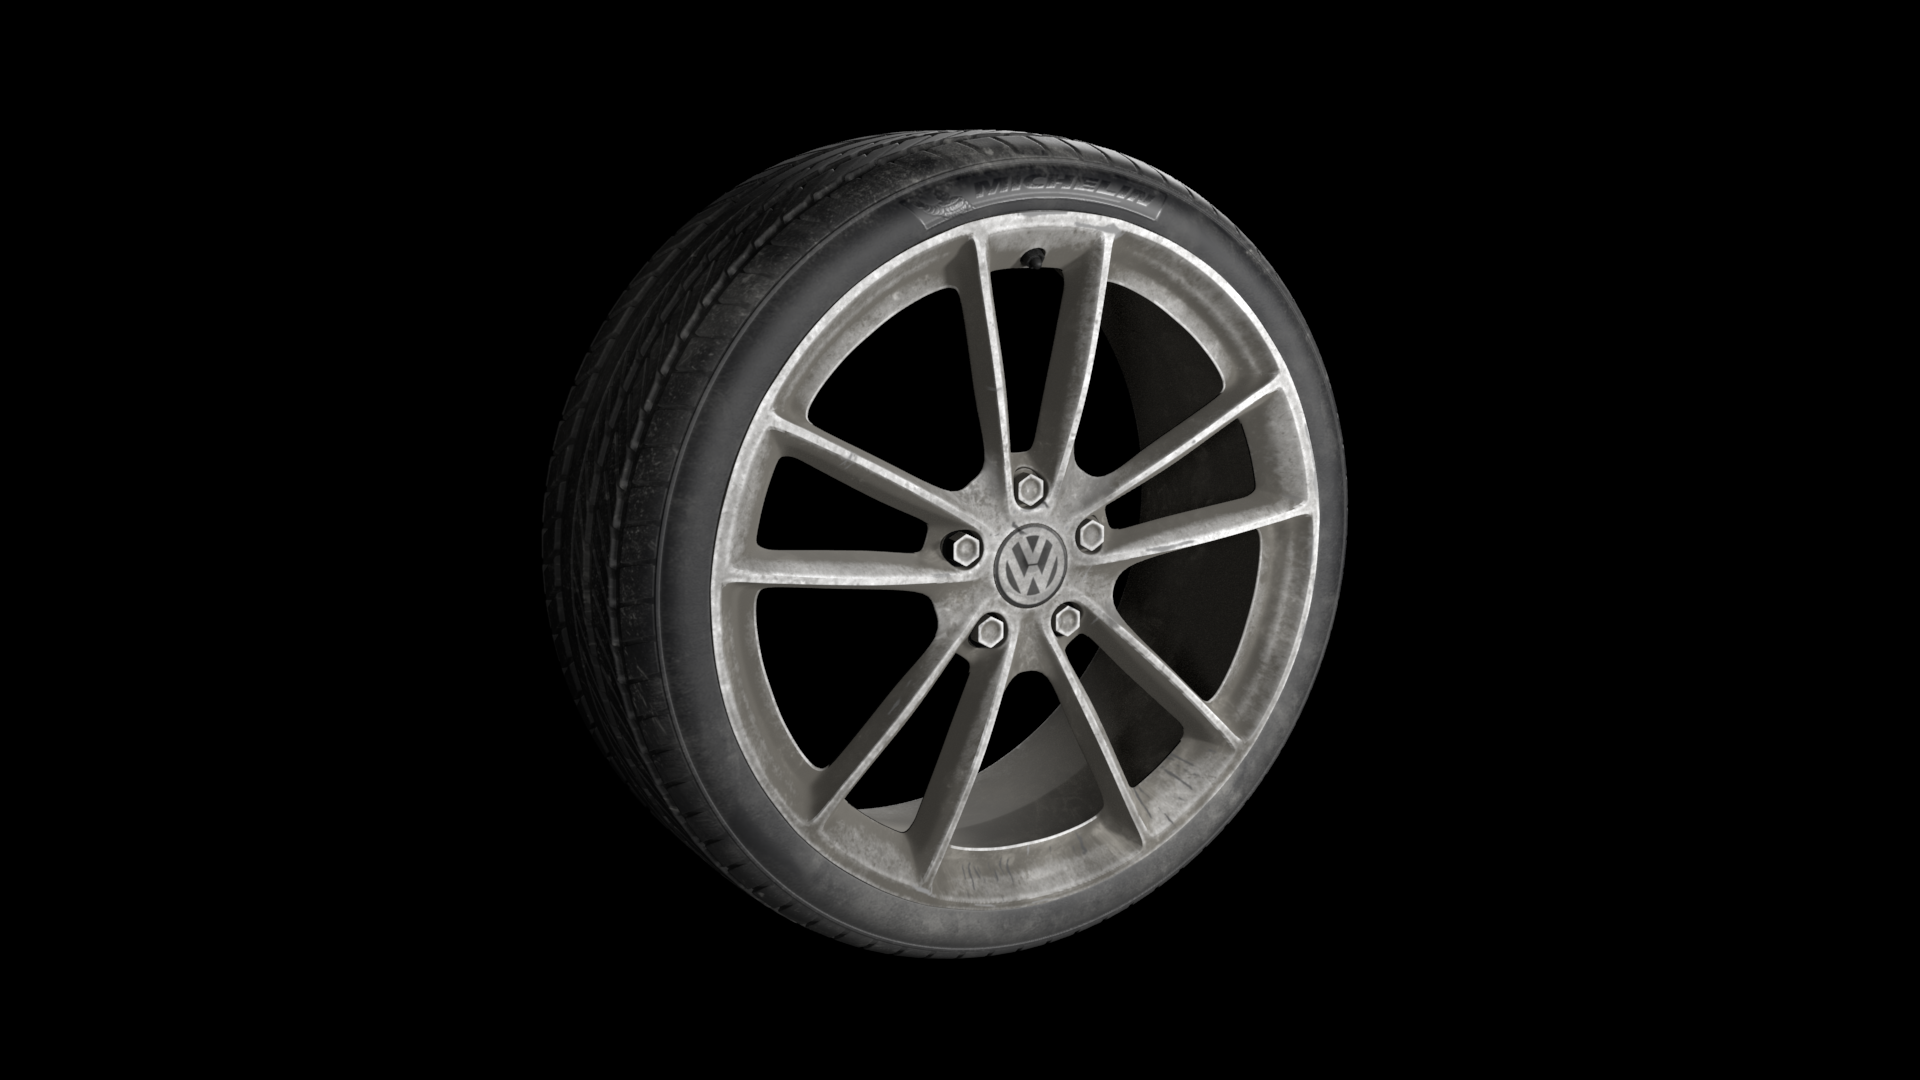 2nd year project modeling a Volkswagen wheel, textured by Courtney Power.